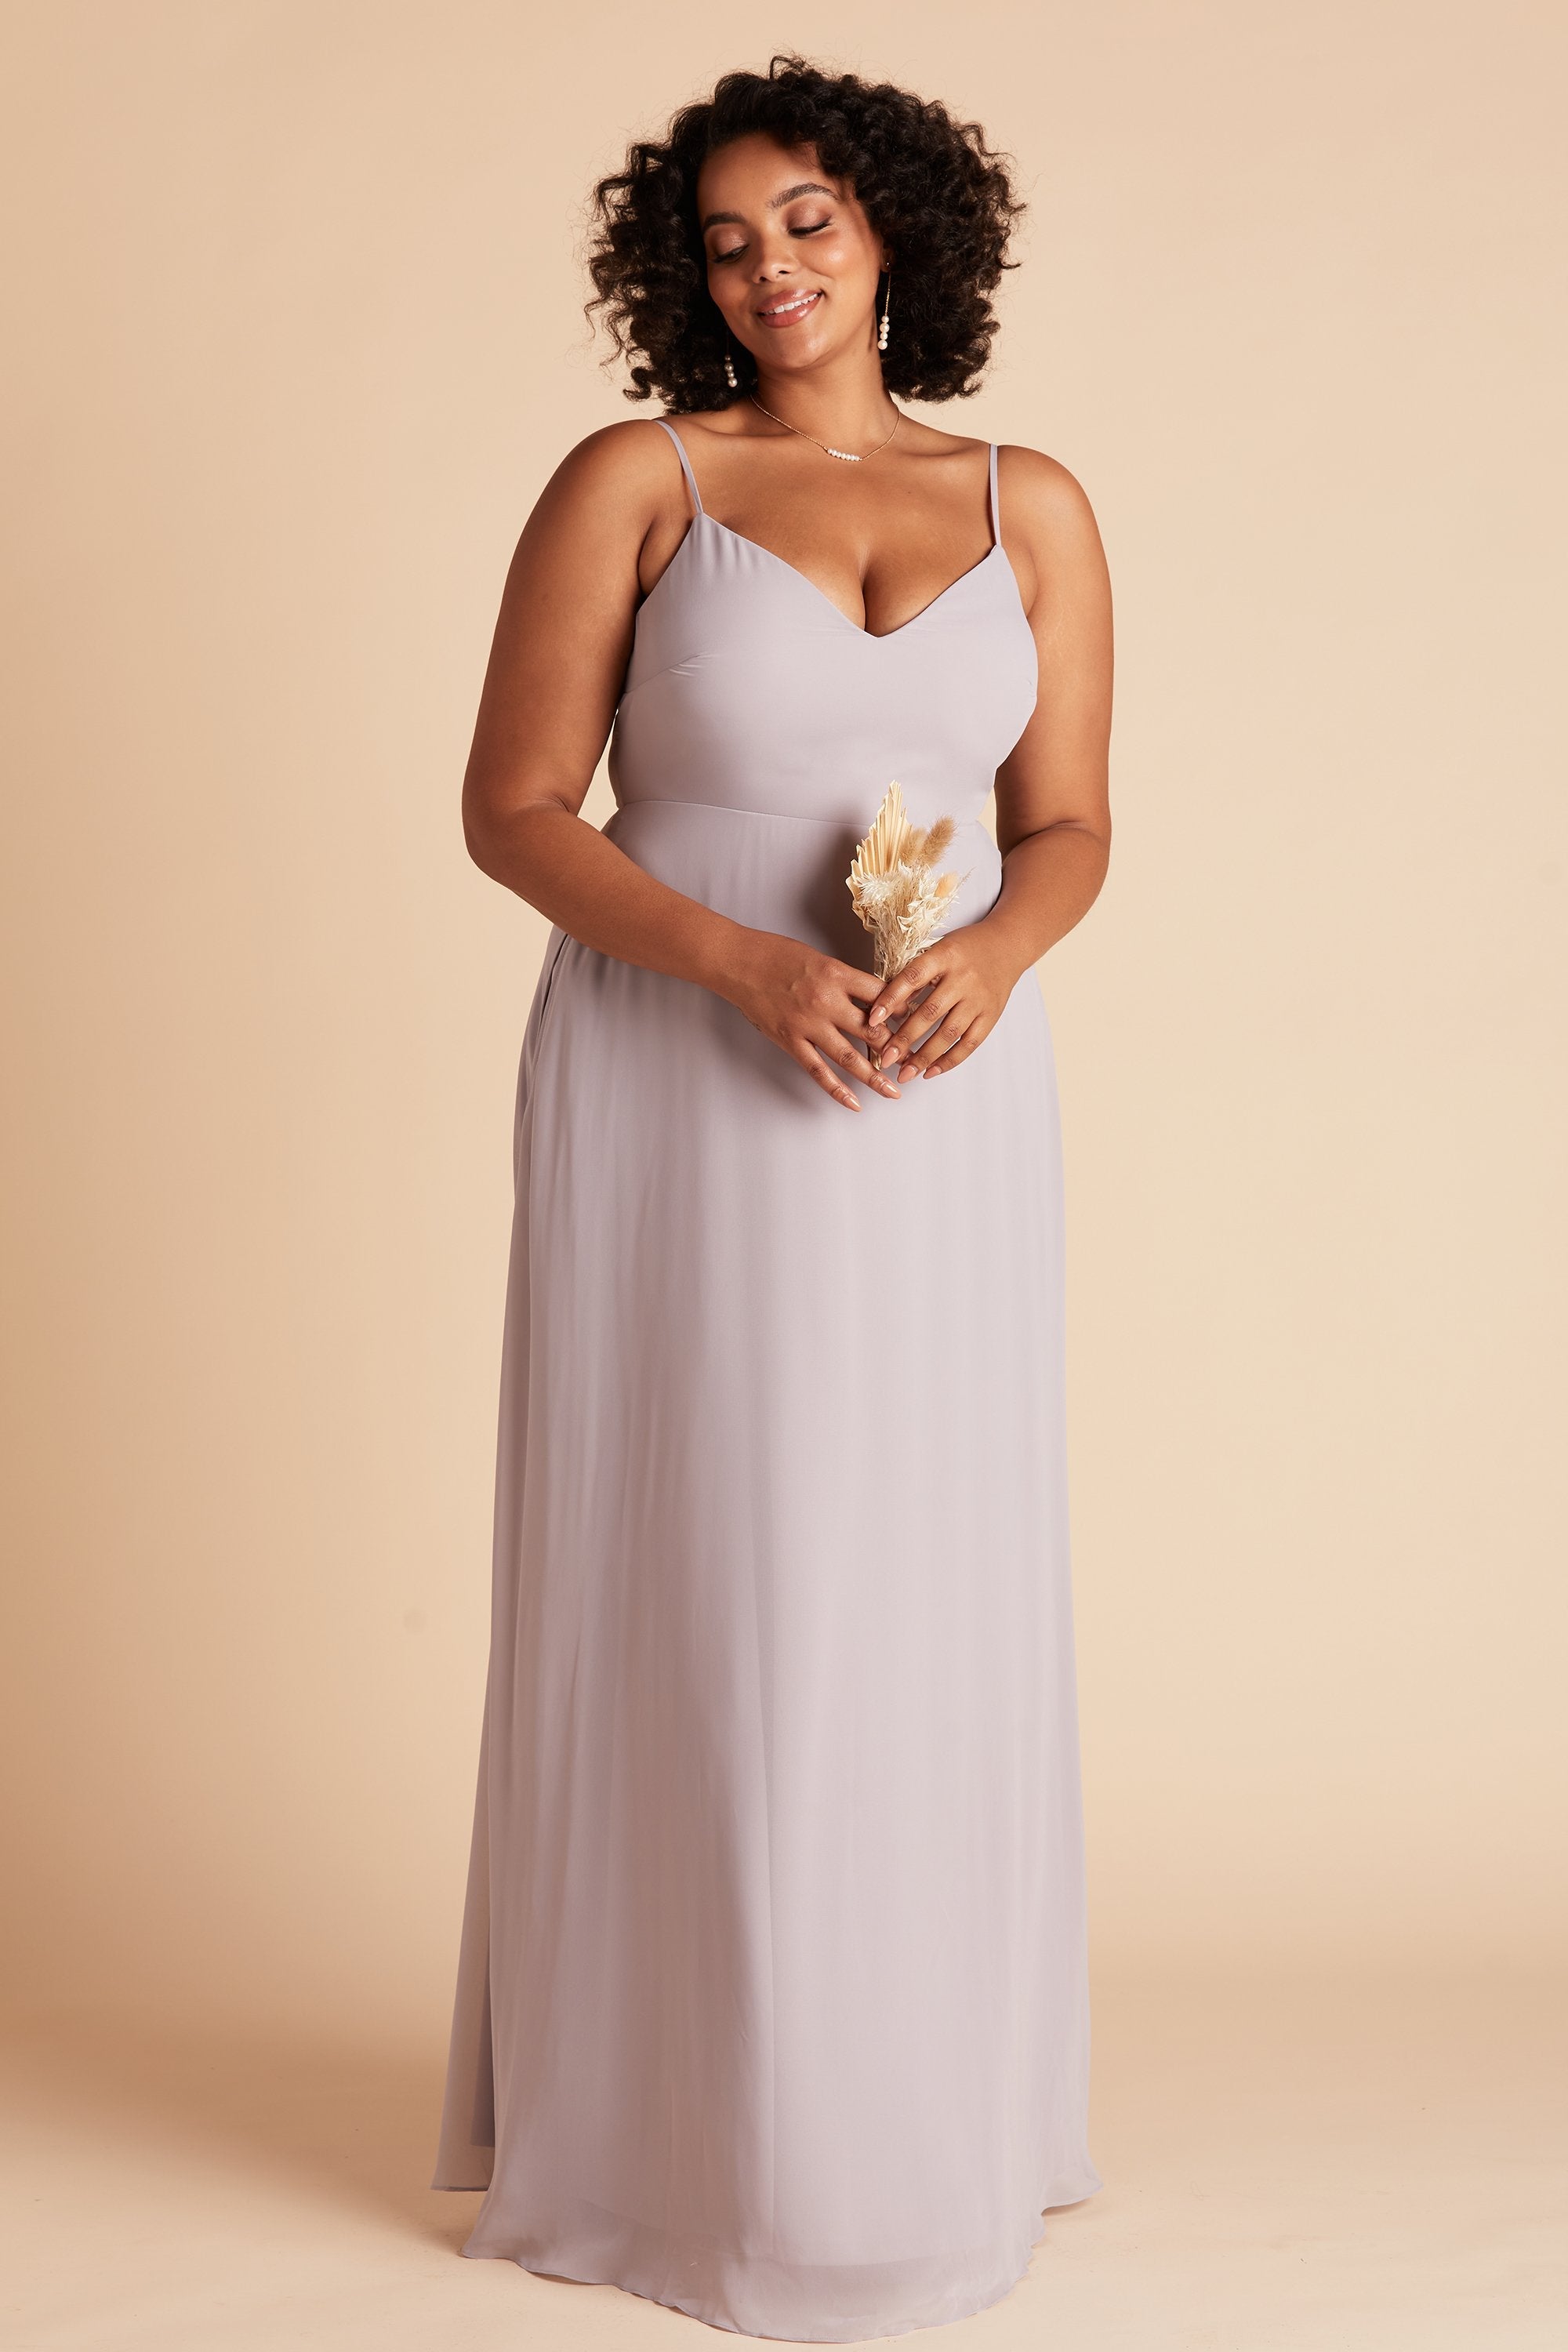 Devin convertible plus size bridesmaids dress in lilac purple chiffon by Birdy Grey, front view